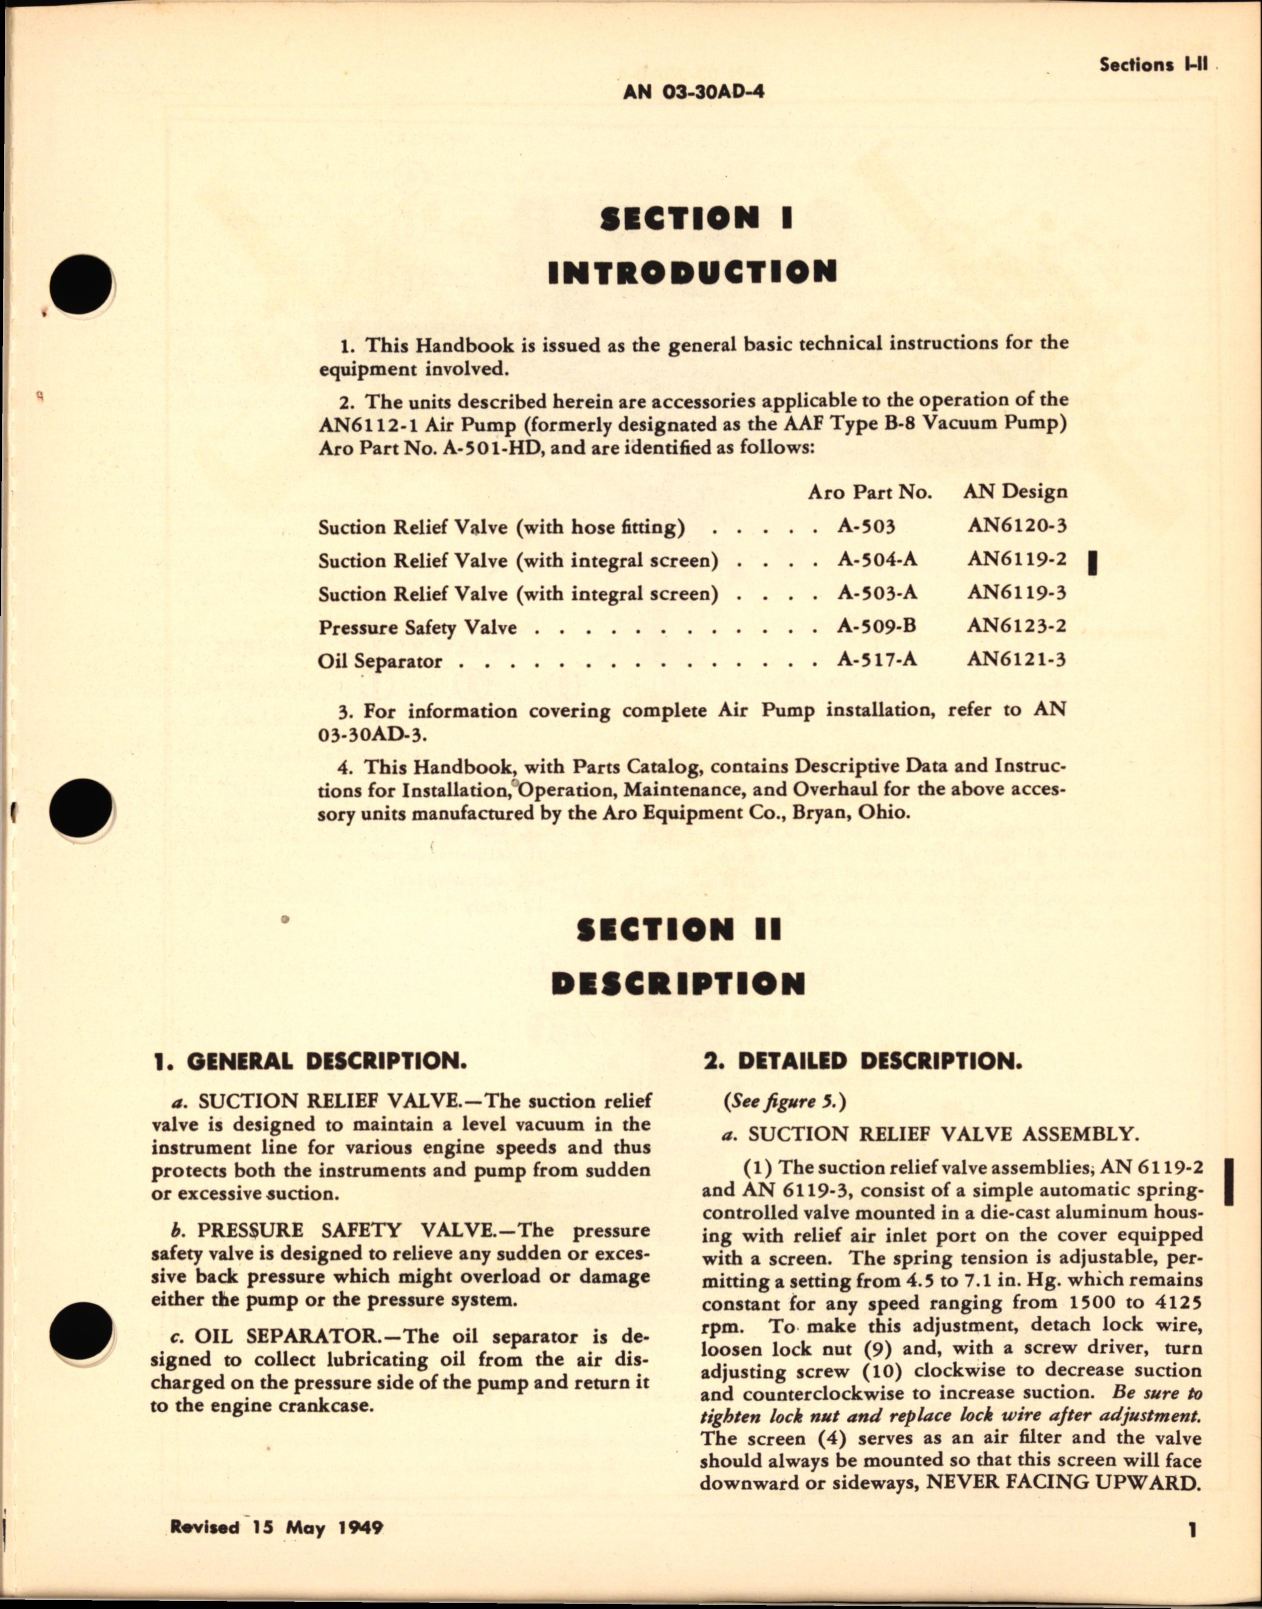 Sample page 5 from AirCorps Library document: Handbook Operation, Service, and Overhaul Instructions with Parts Catalog for Relief Valves, Safety Valve and Oil Separator 